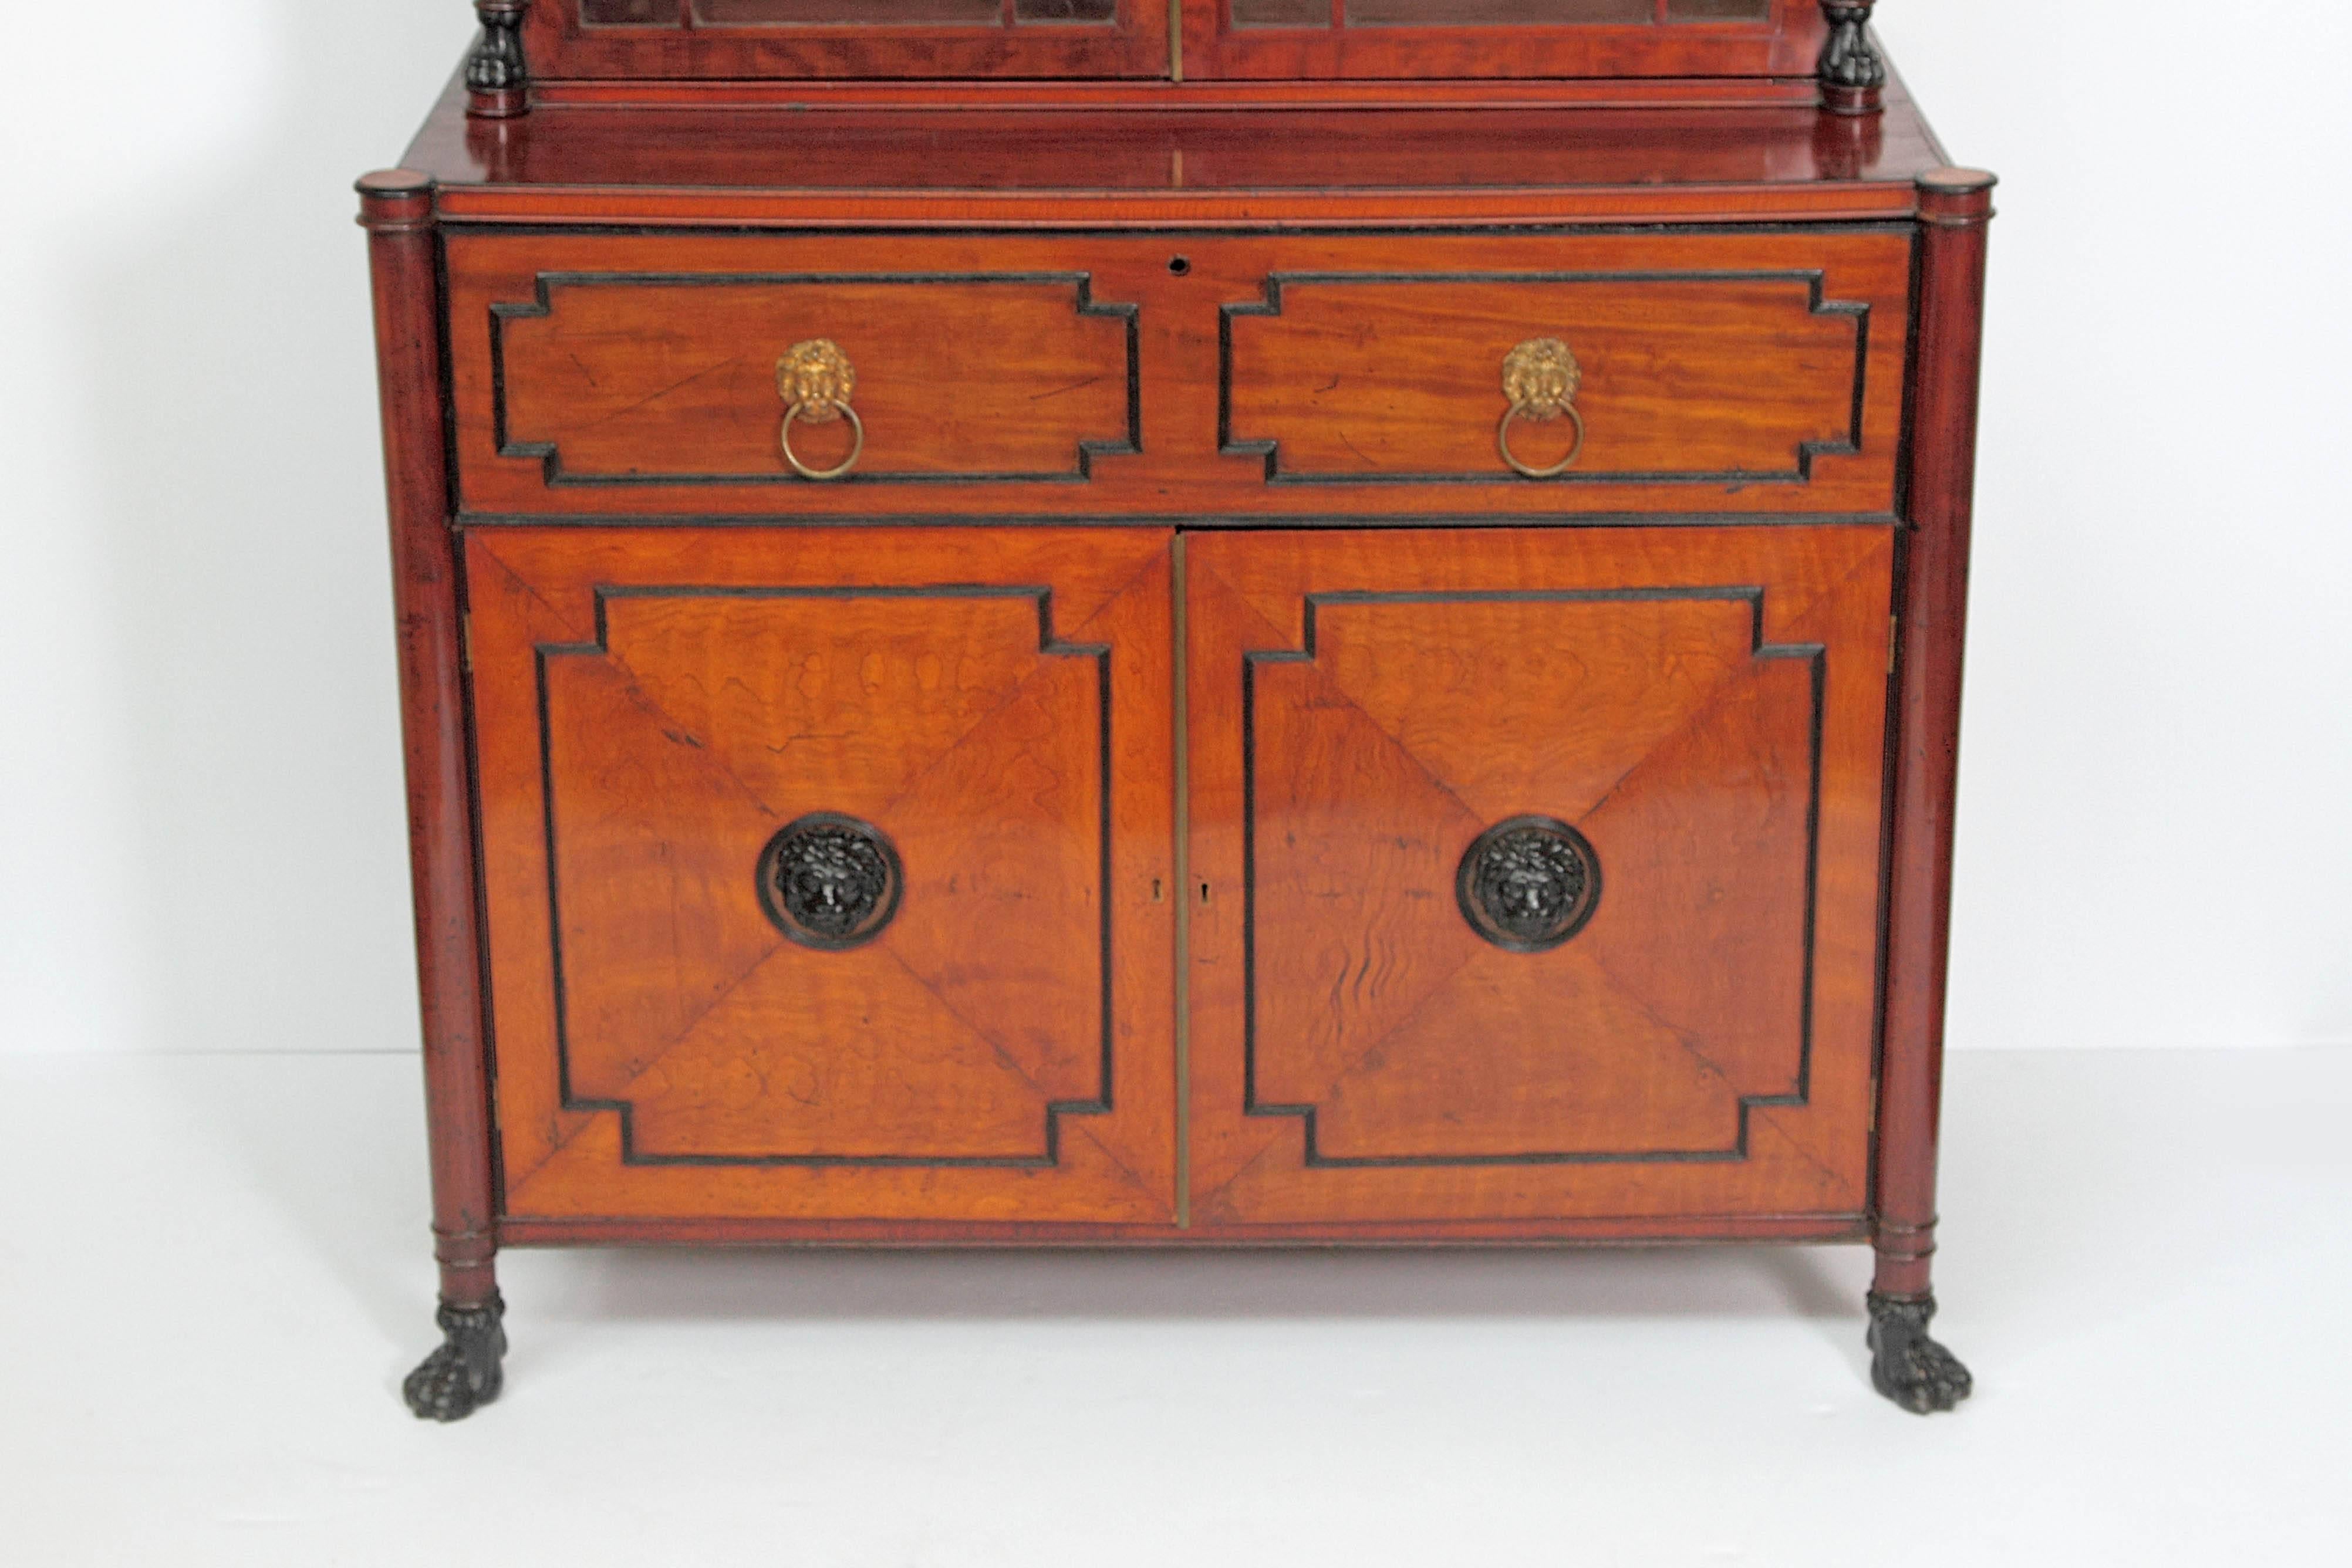 English Regency period mahogany and satinwood two-piece secretary cabinet. Pine secondary wood. Top section having a shaped cornice with an ebonized lion medallion flanked by sphinxes to the center and ebonized lion masks to the corners, over an